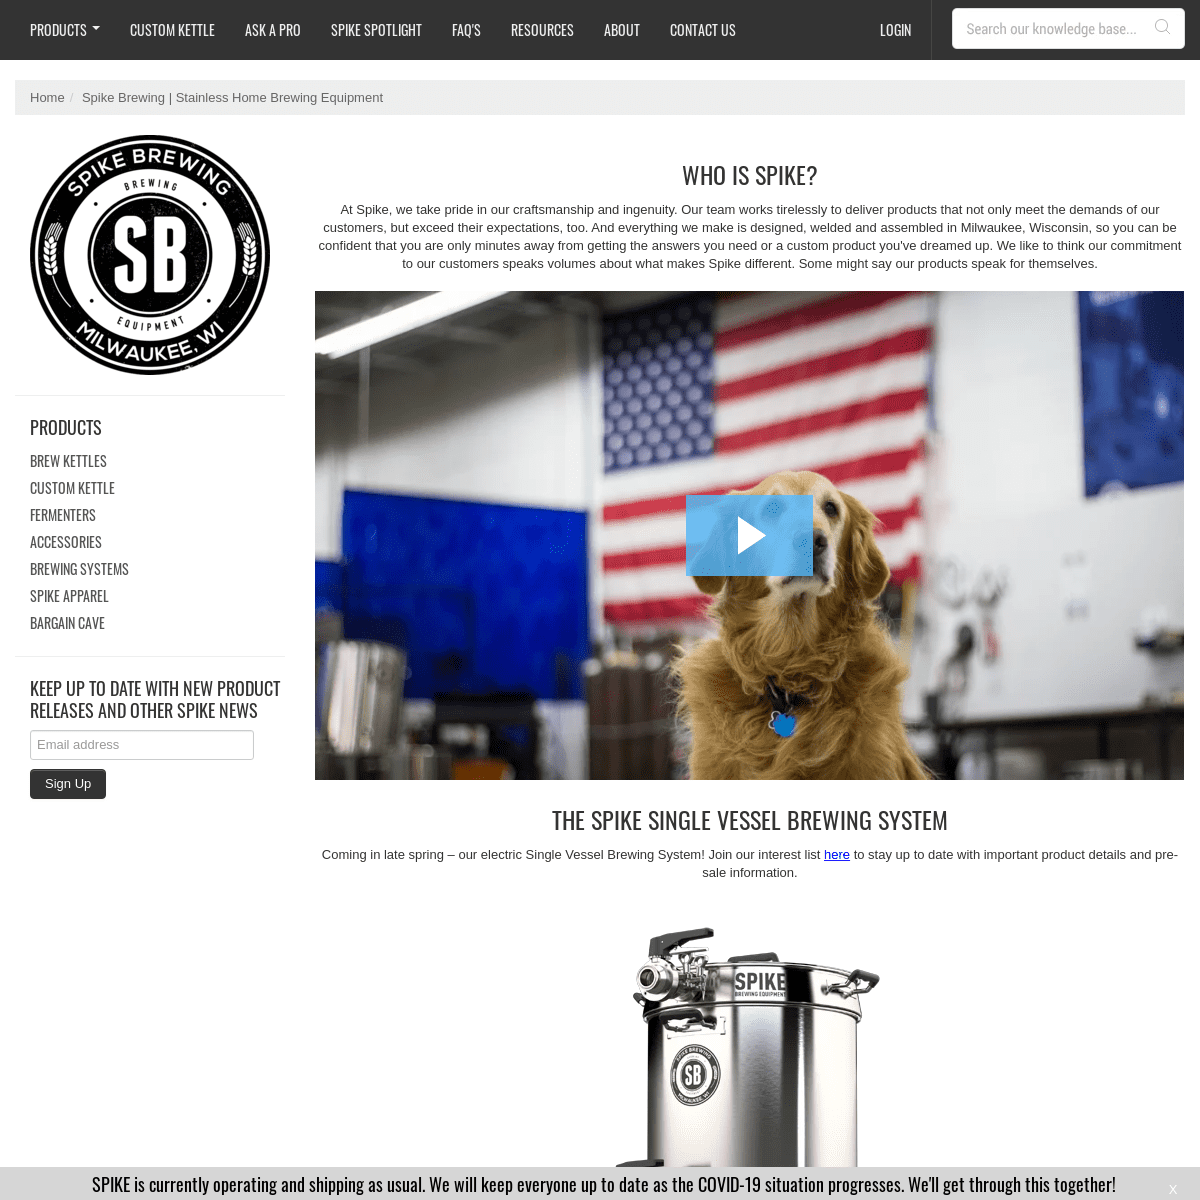 A complete backup of spikebrewing.com